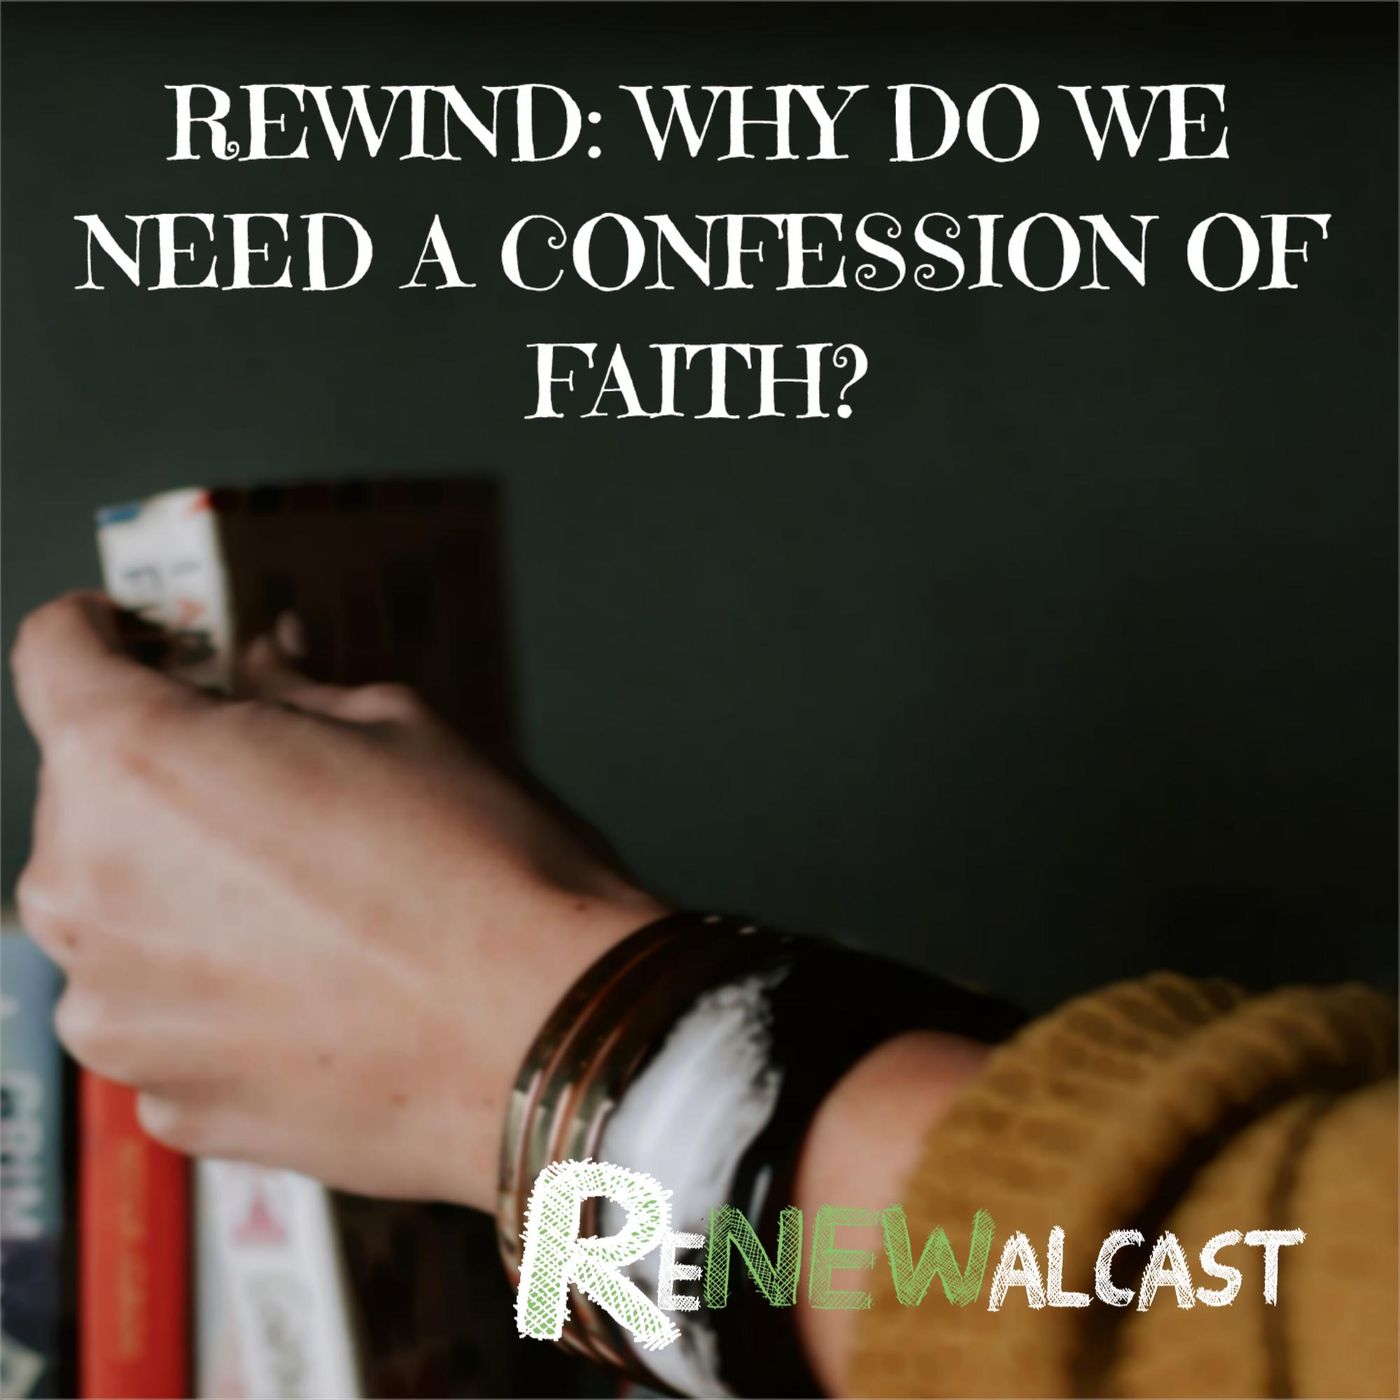 REWIND: Why do we need a Confession of Faith? Part 1